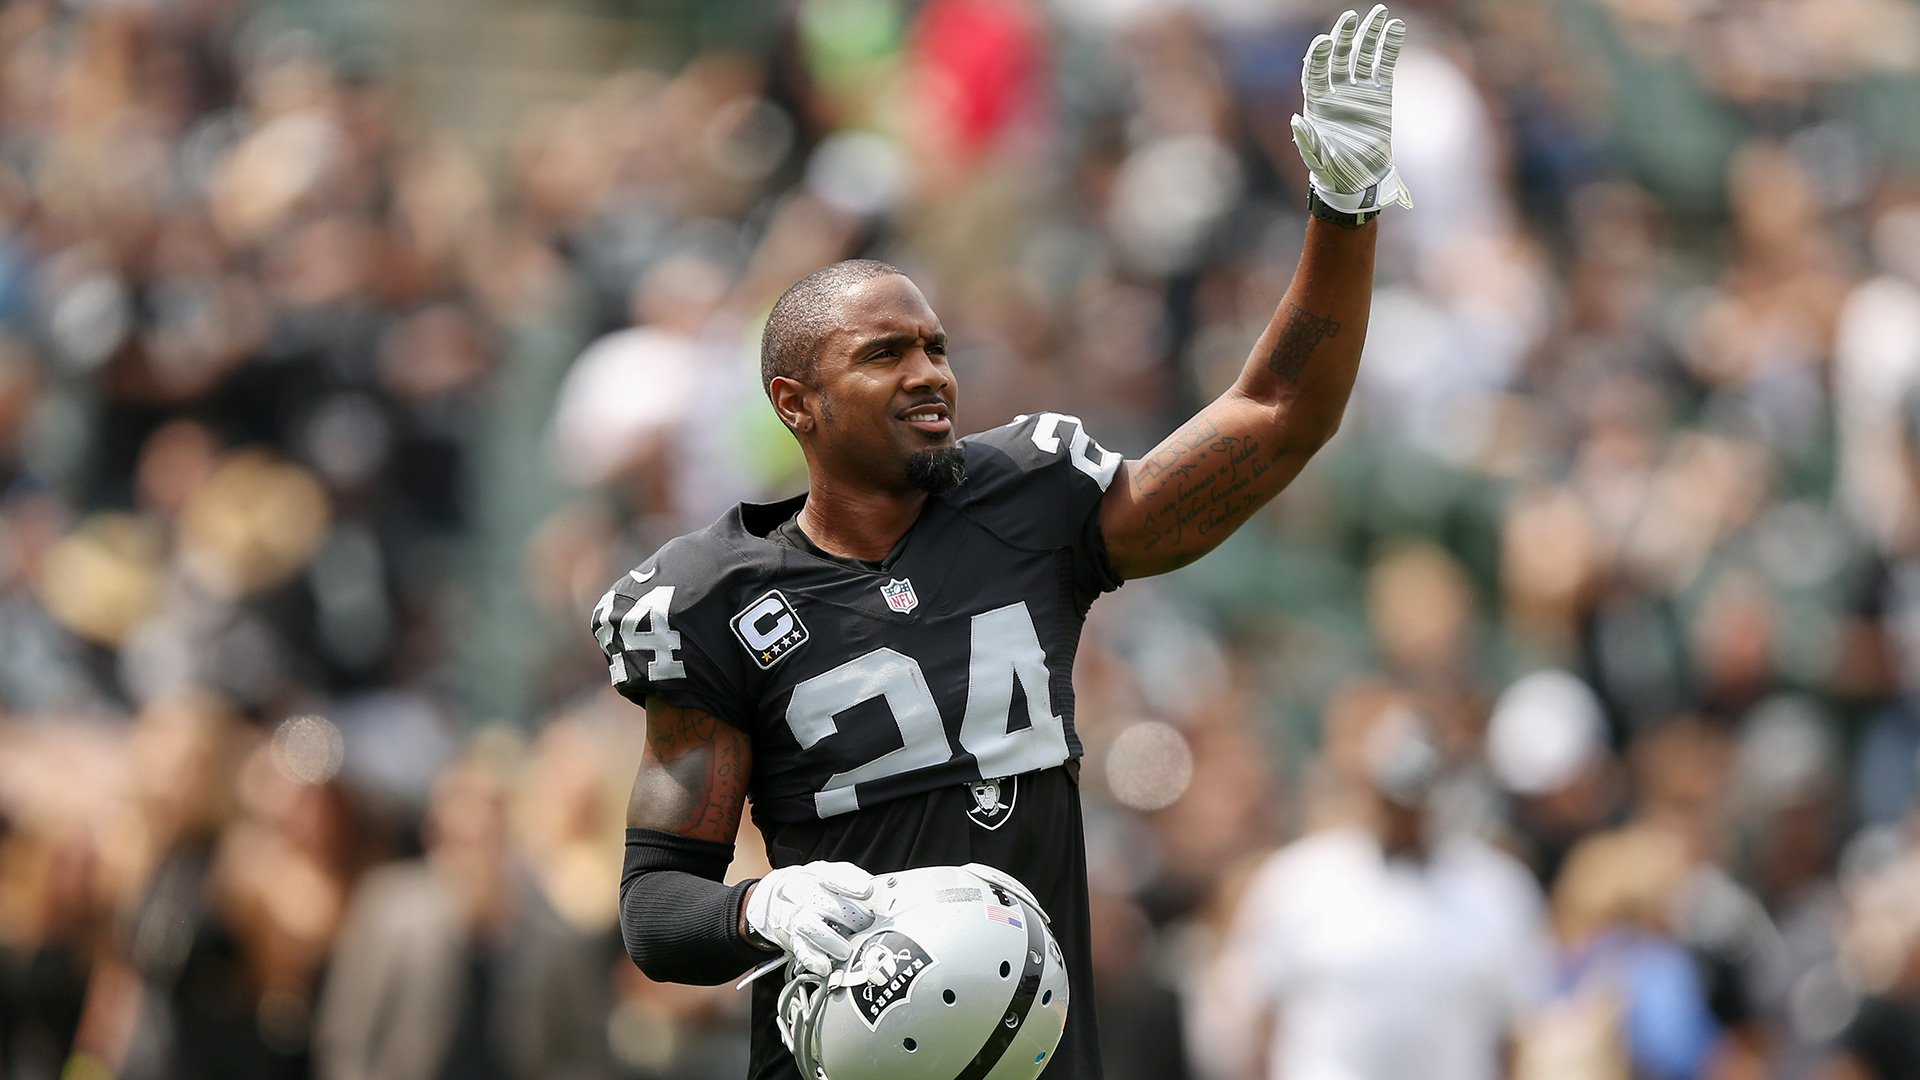 Charles Woodson vs. Peyton Manning, two INTs 18 seasons in the making